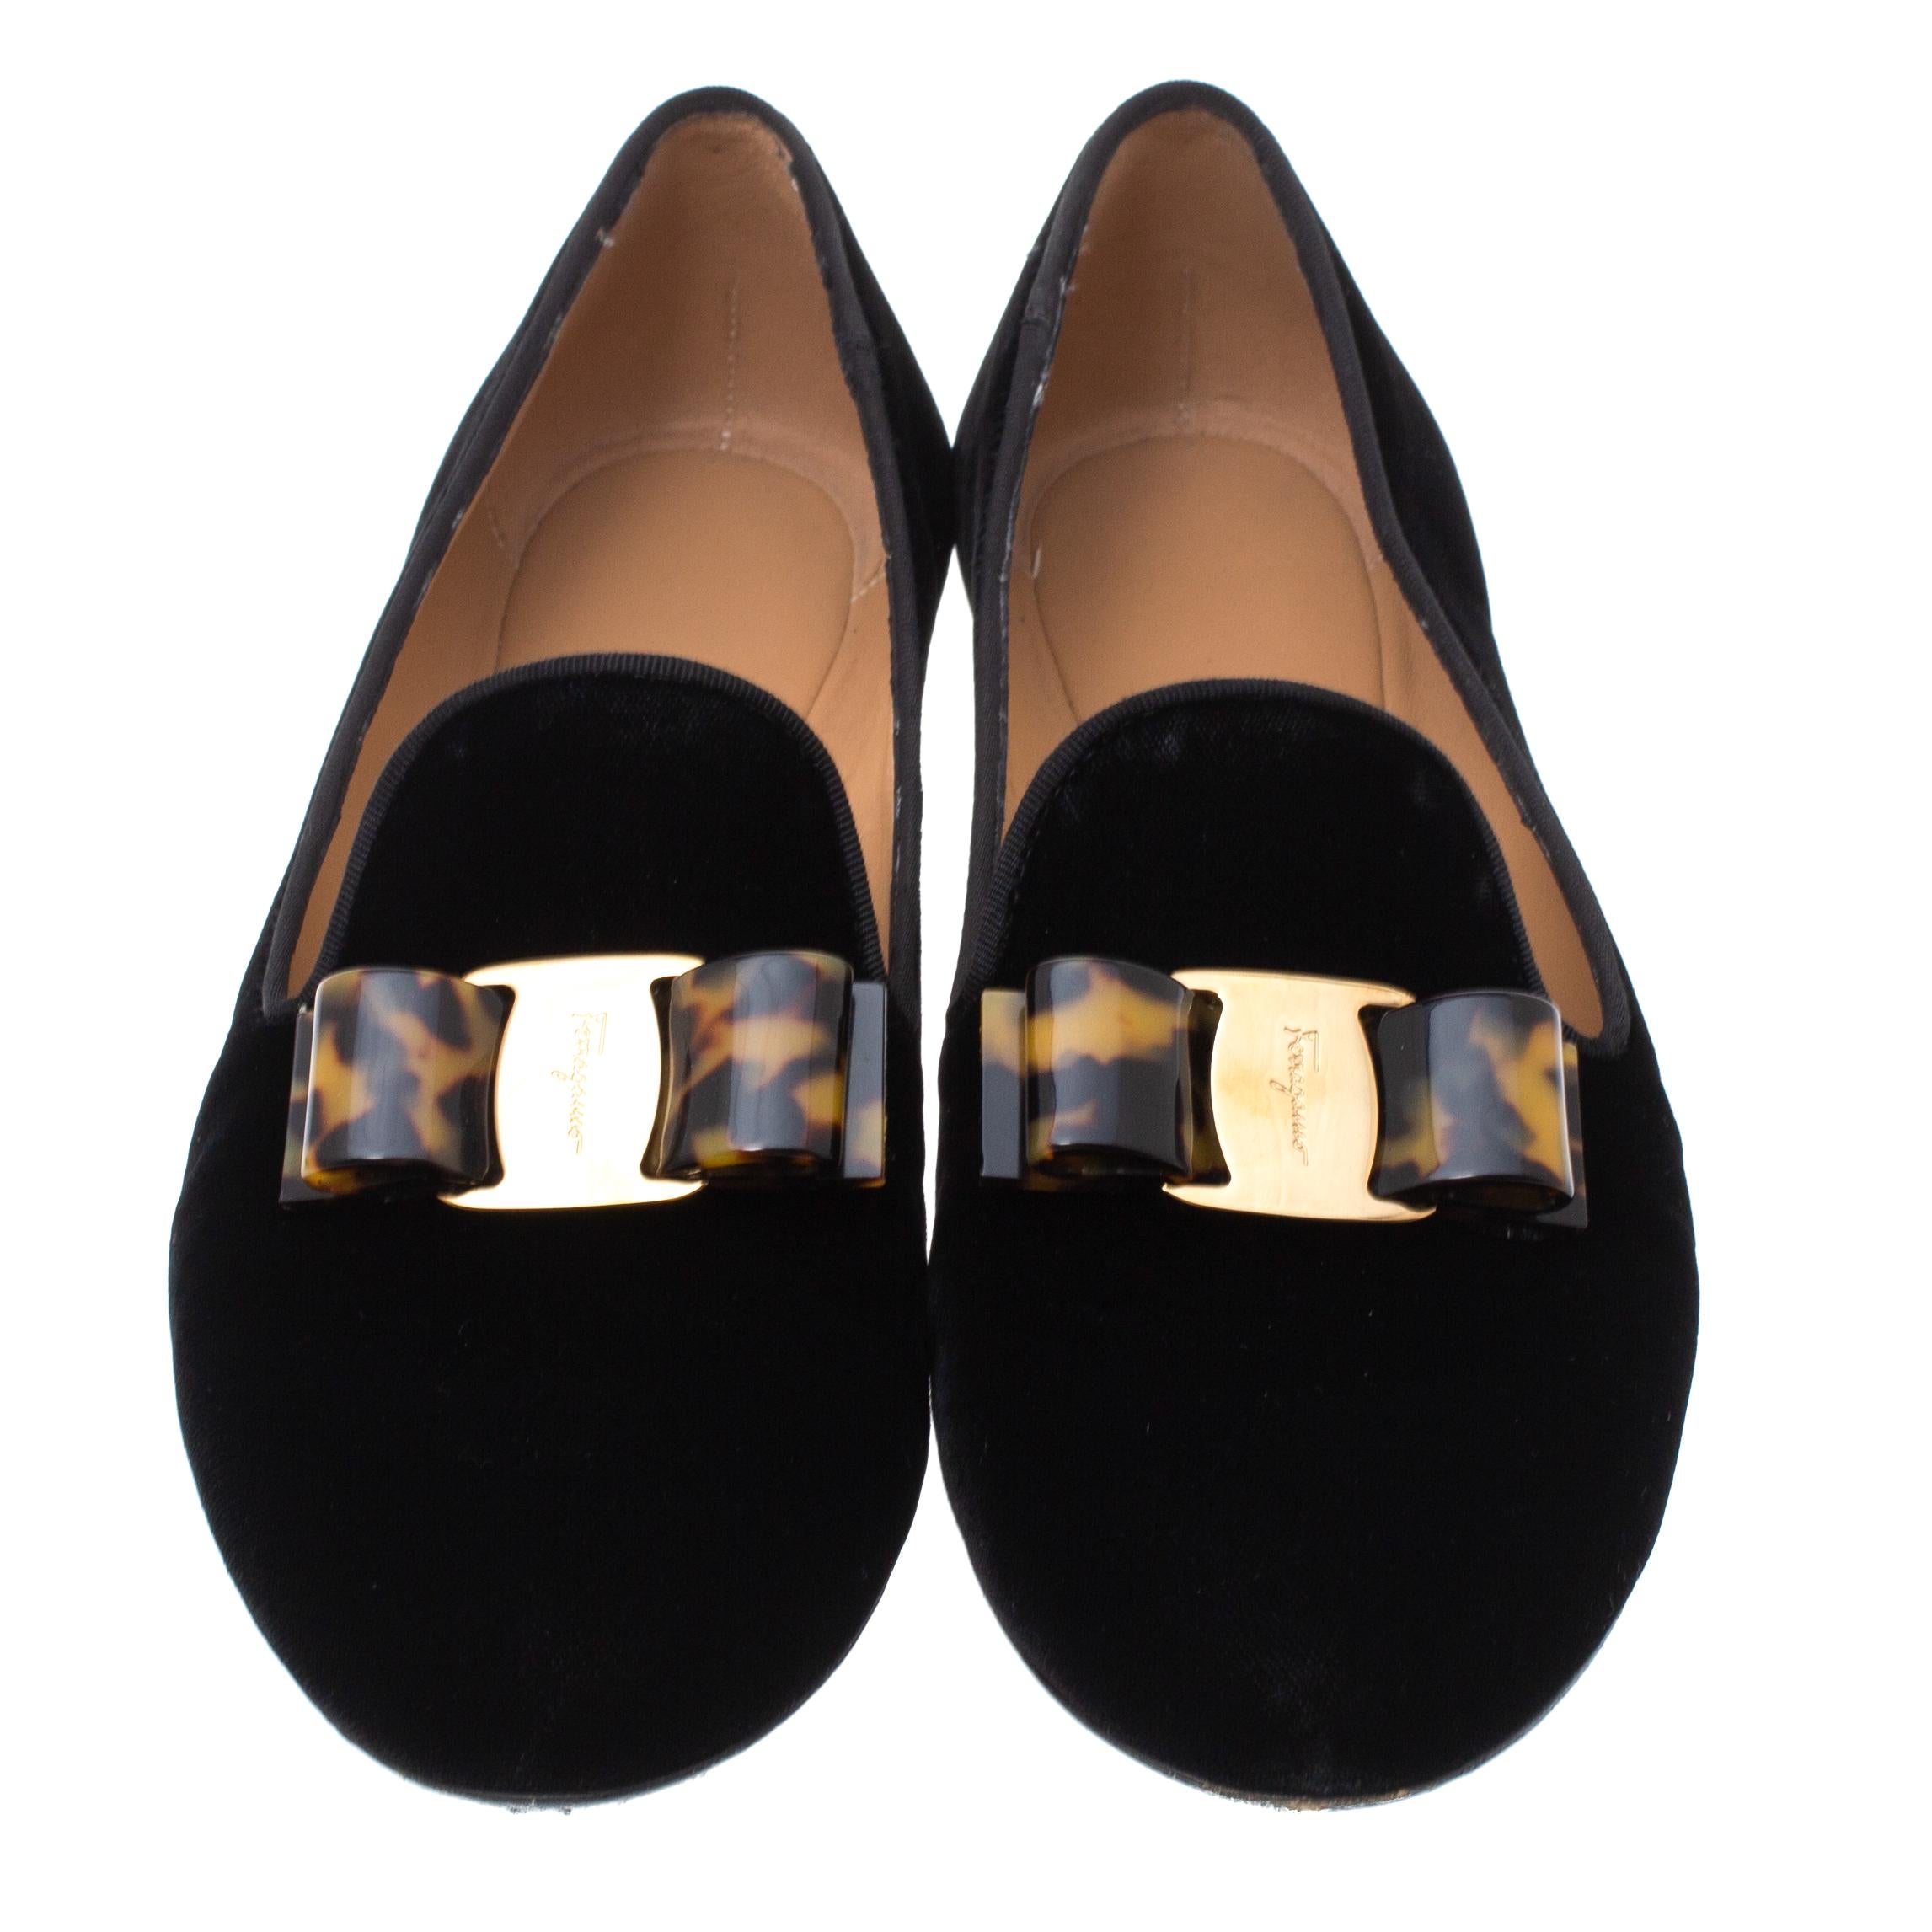 Crafted in black velvet, these Smoking slippers from Salvatore Ferragamo will be your ultimate go-to wear. The shoe comes with a round-toe and rests on a leather sole. It comes with a leather-lined insole and is detailed with the signature bow on